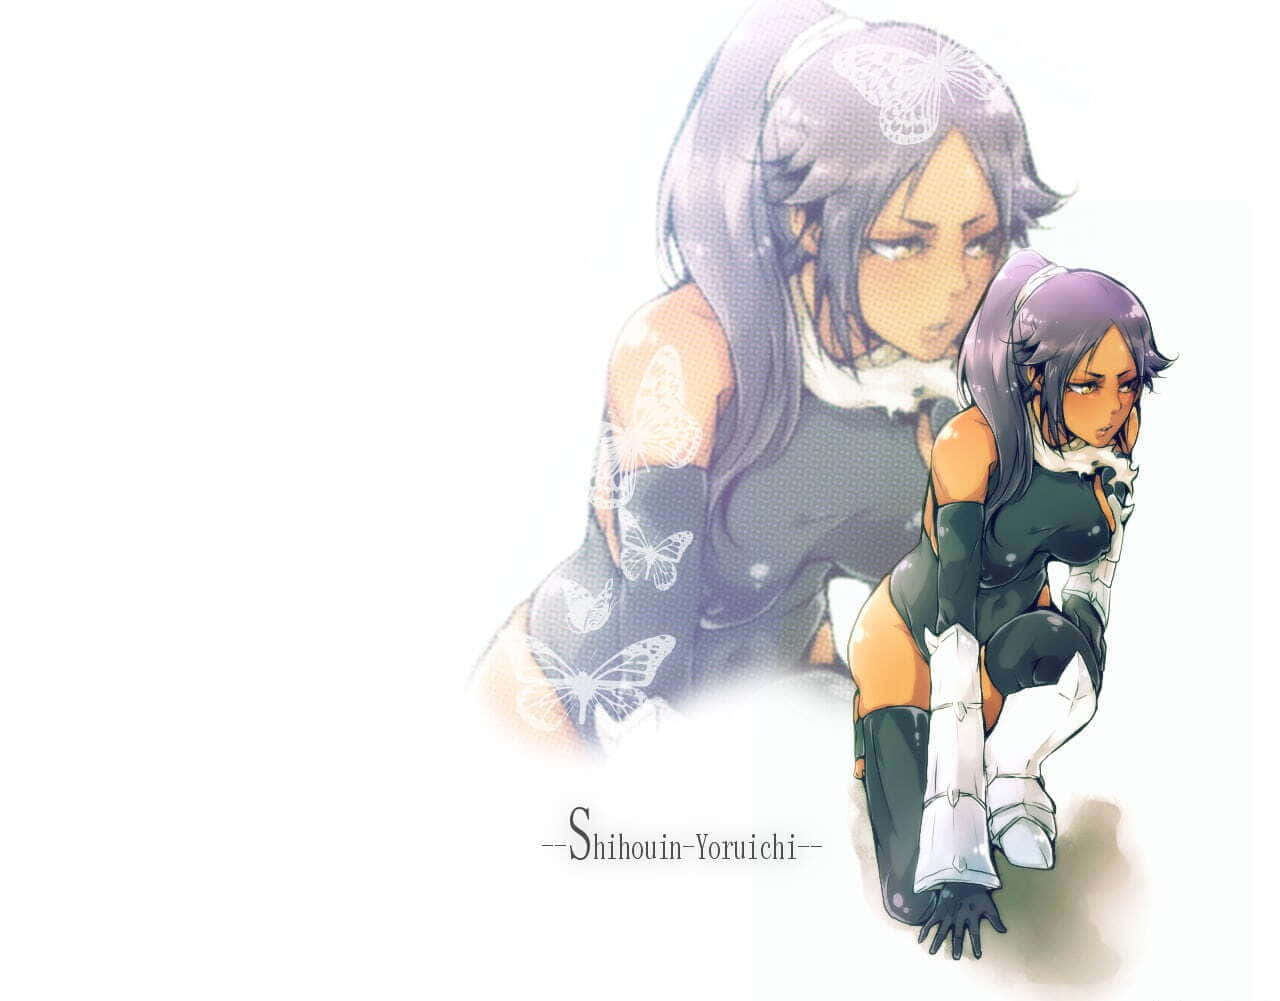 Yoruichi Shihoin Stands Up for Justice Wallpaper